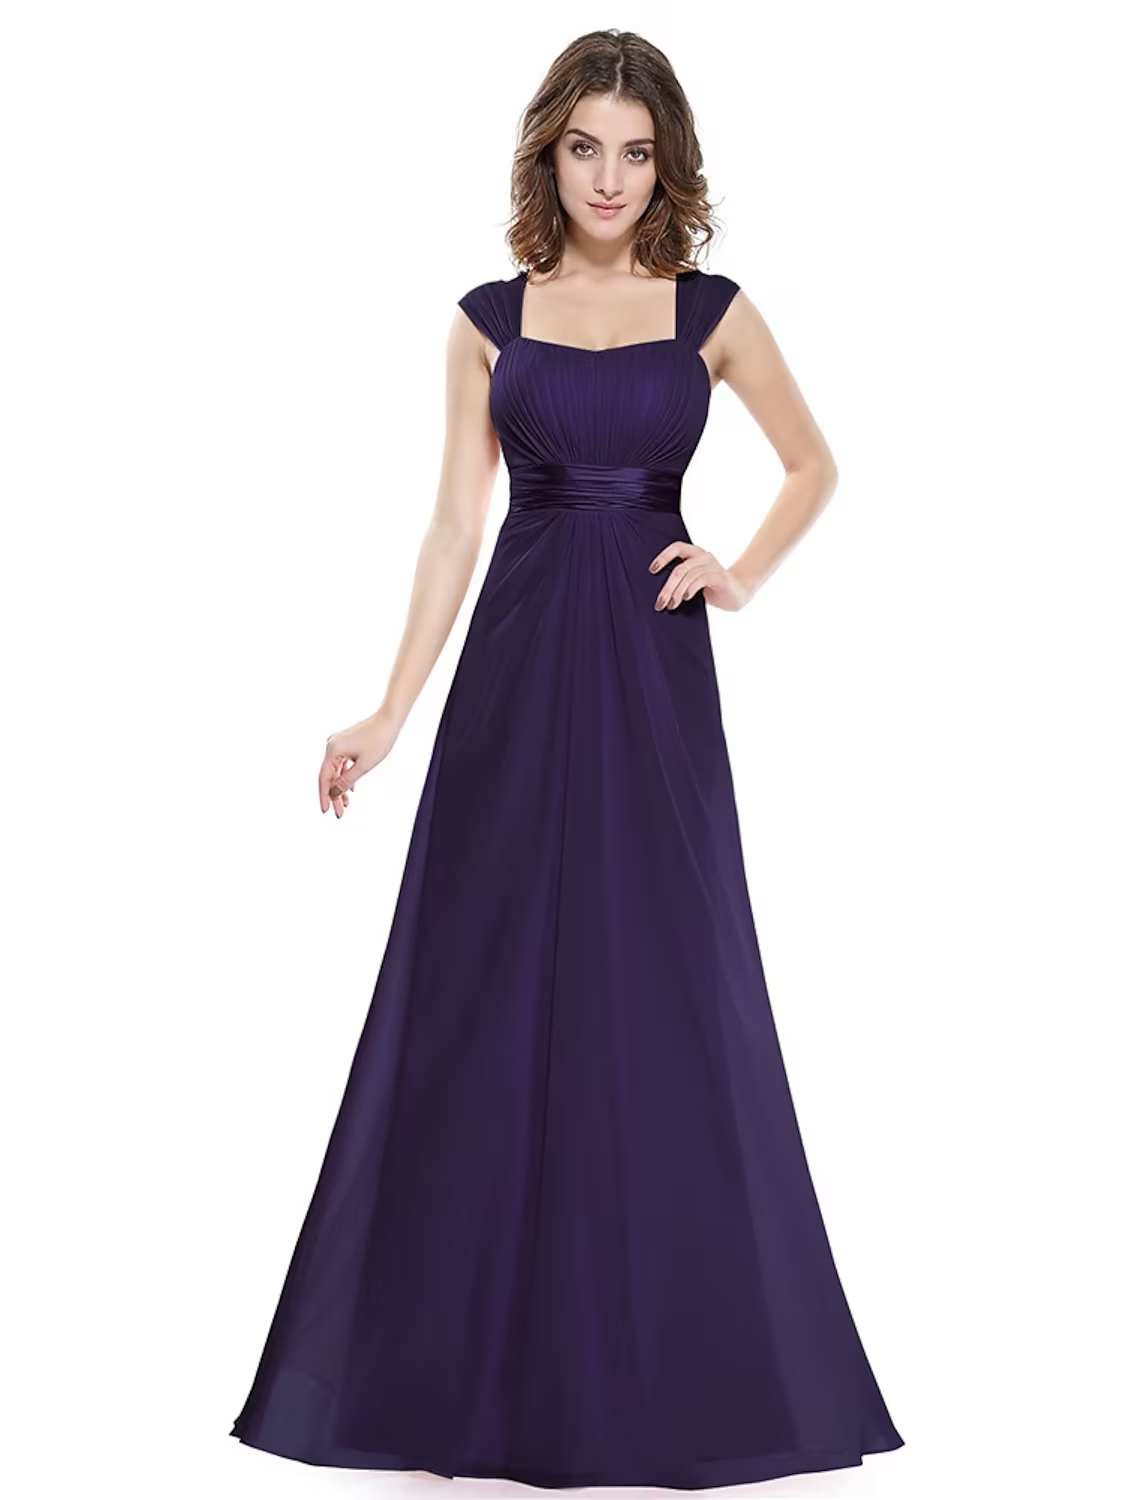 A-Line Evening Gown Beautiful Back Dress Wedding Guest Floor Length Sleeveless Scoop Neck Chiffon with Ruched